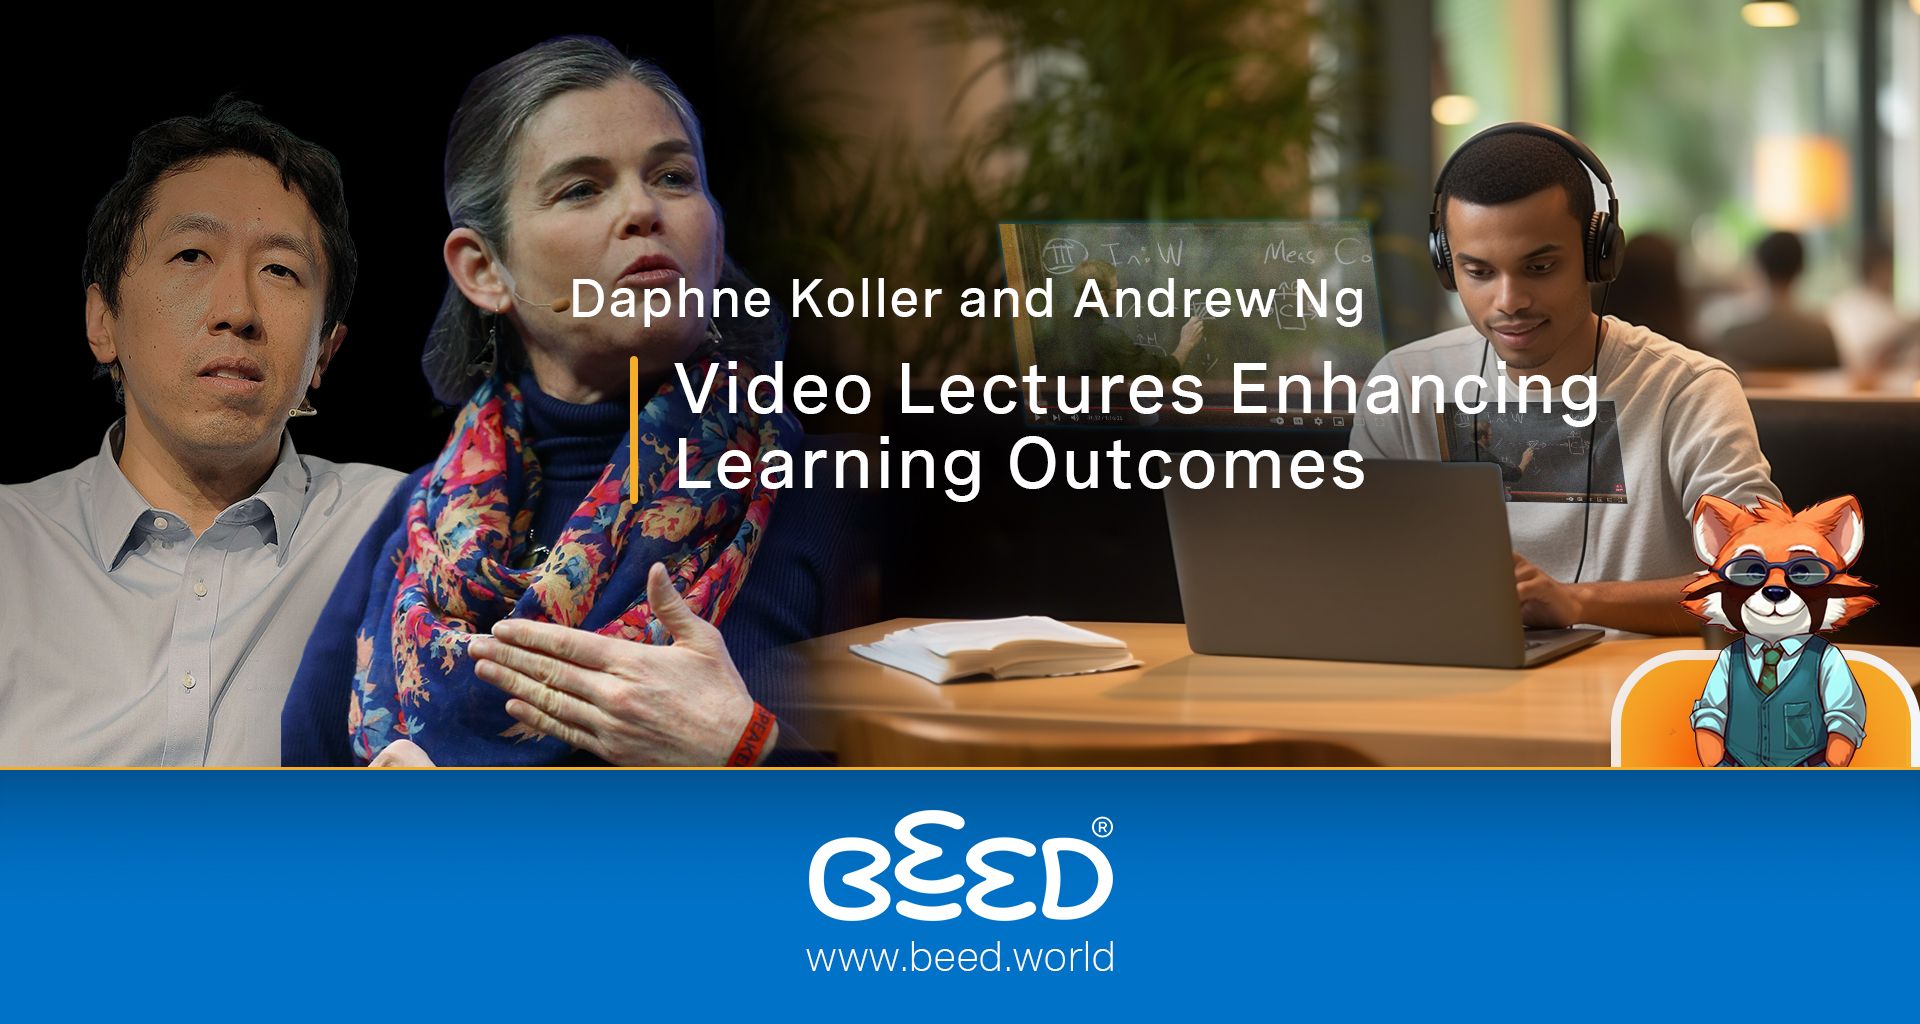 The Use of Video Lectures to Improve Student Engagement and Learning Outcomes